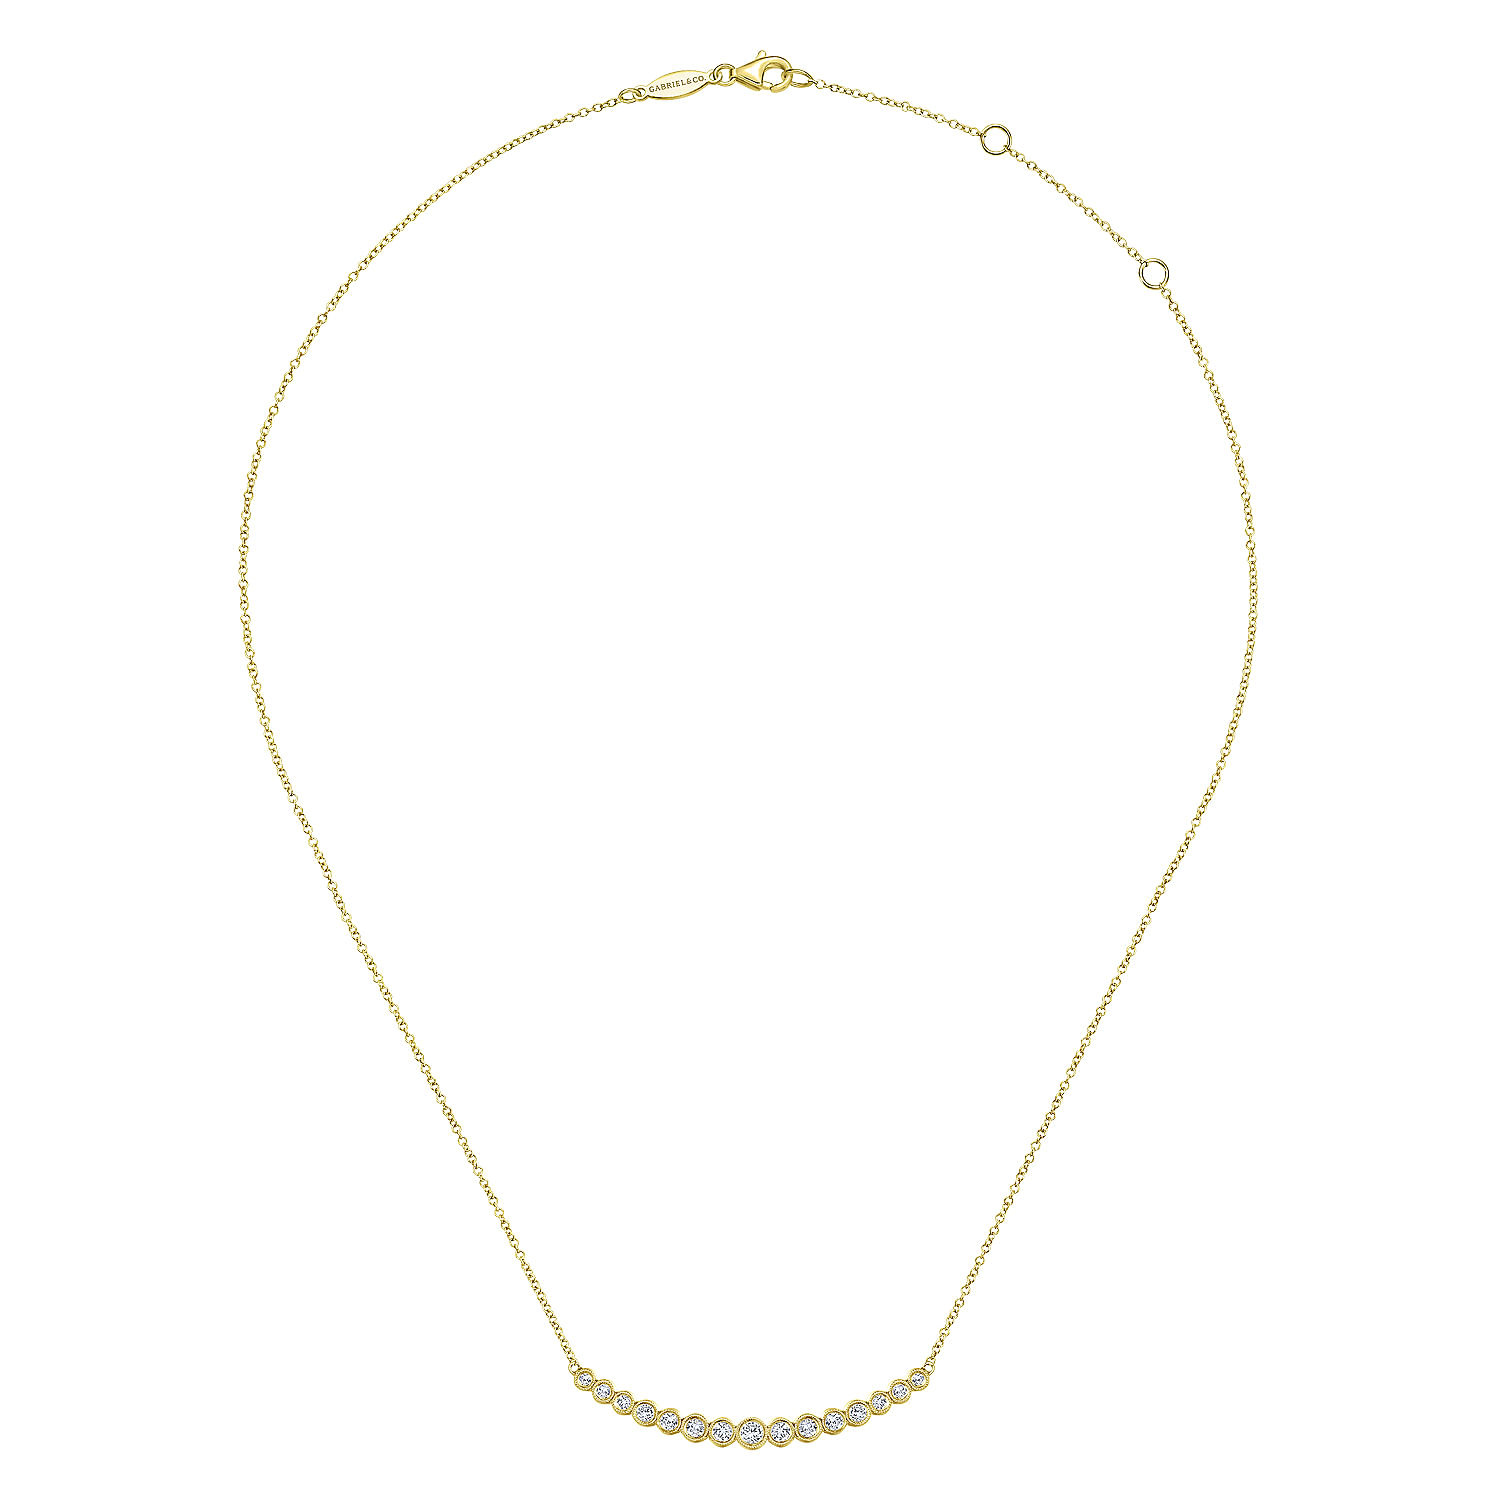 14K Yellow Gold Curved Bar Necklace with Bezel Set Round Diamonds